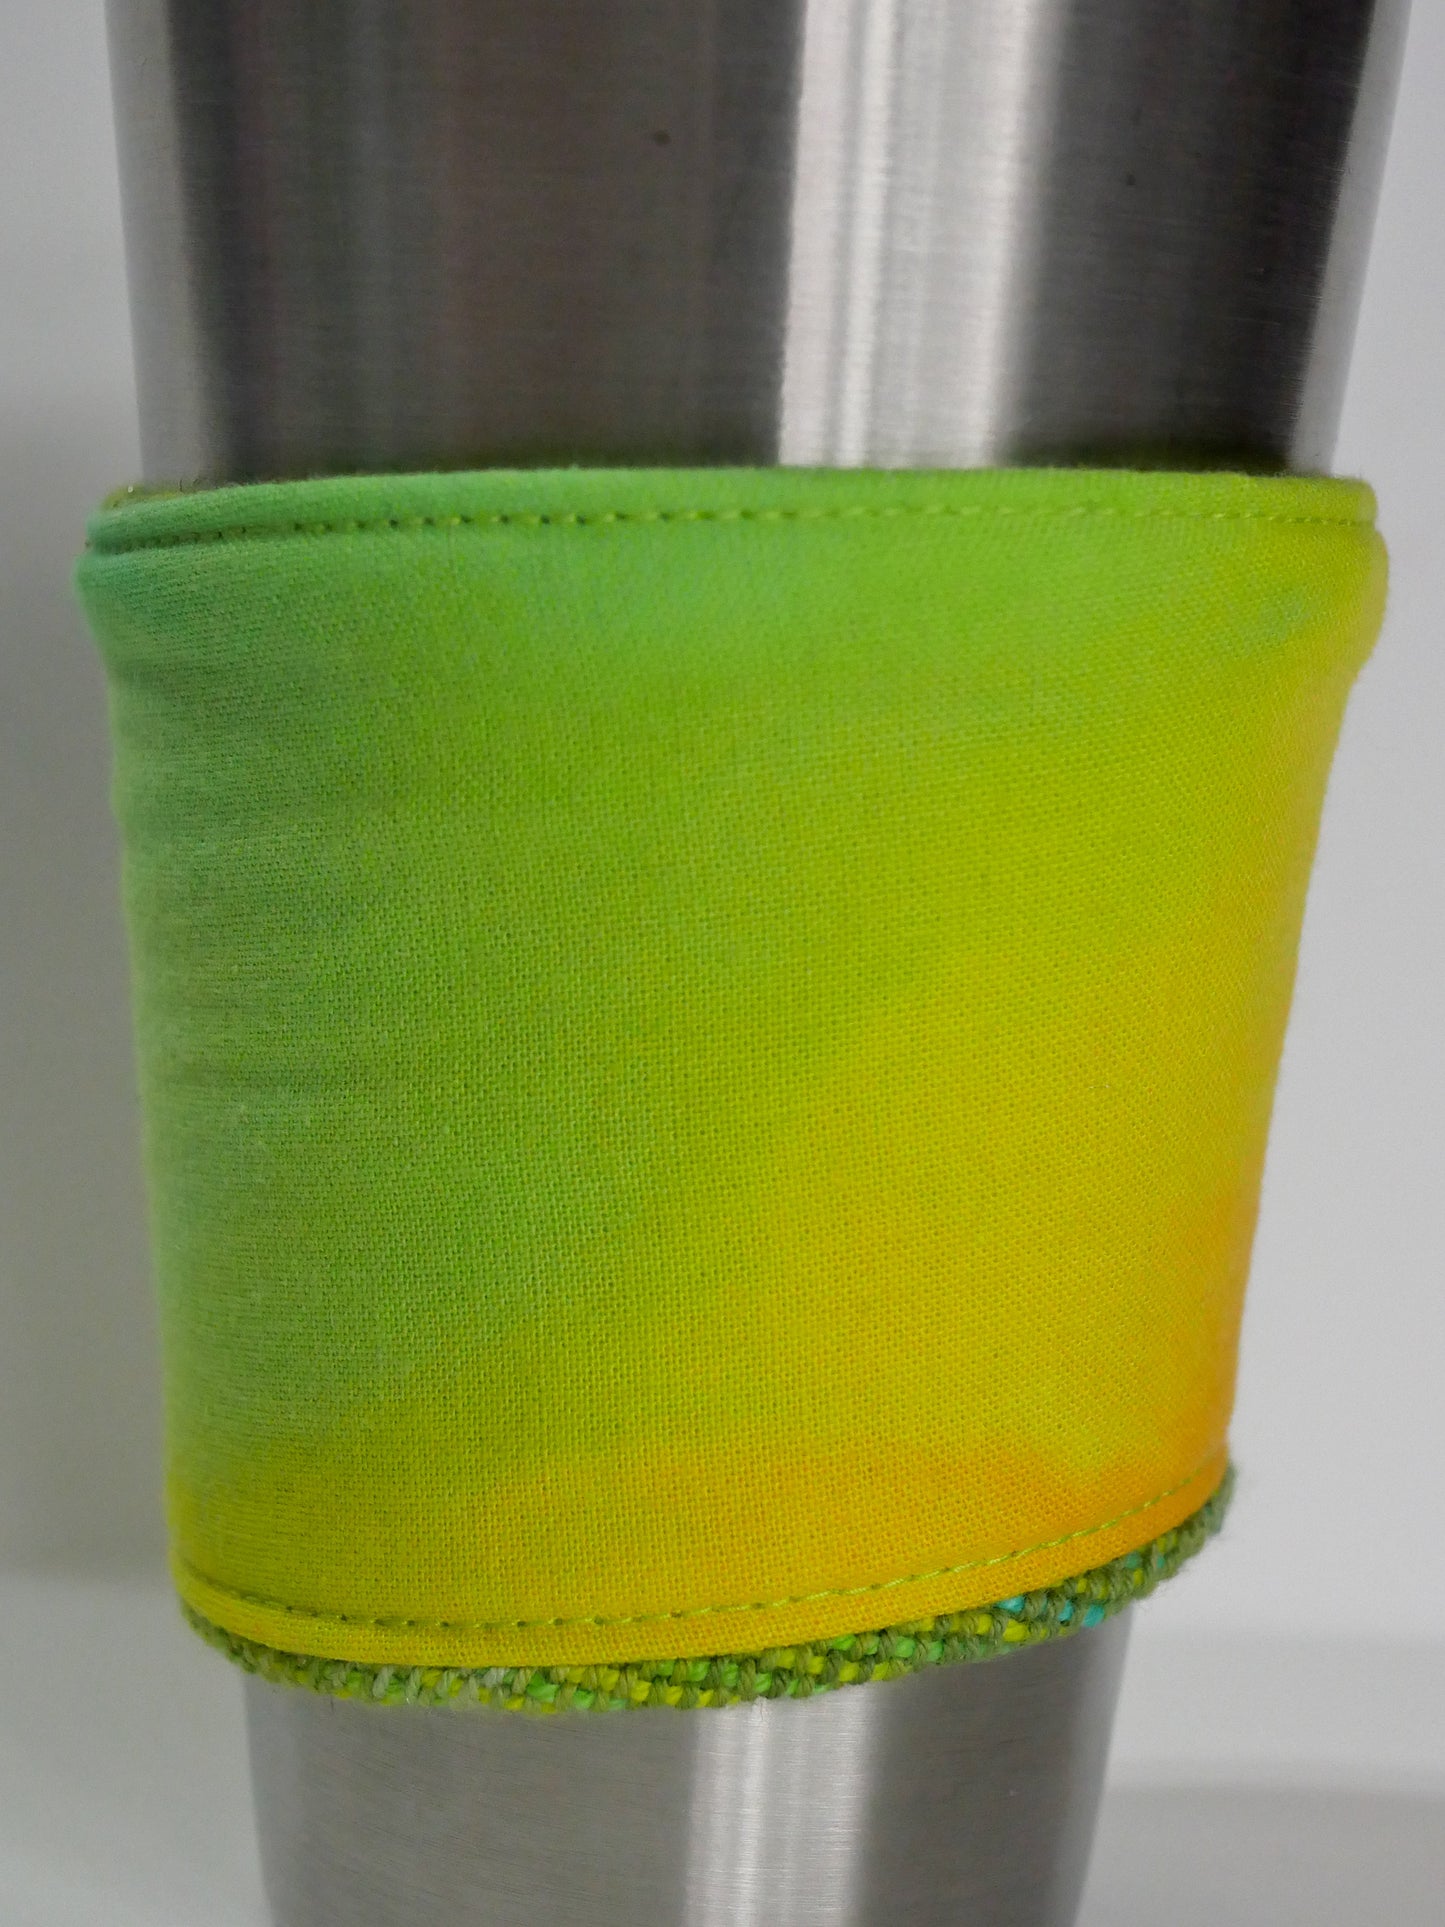 Reversible Cup Sleeve (2nds) - Get Off My Lawn!